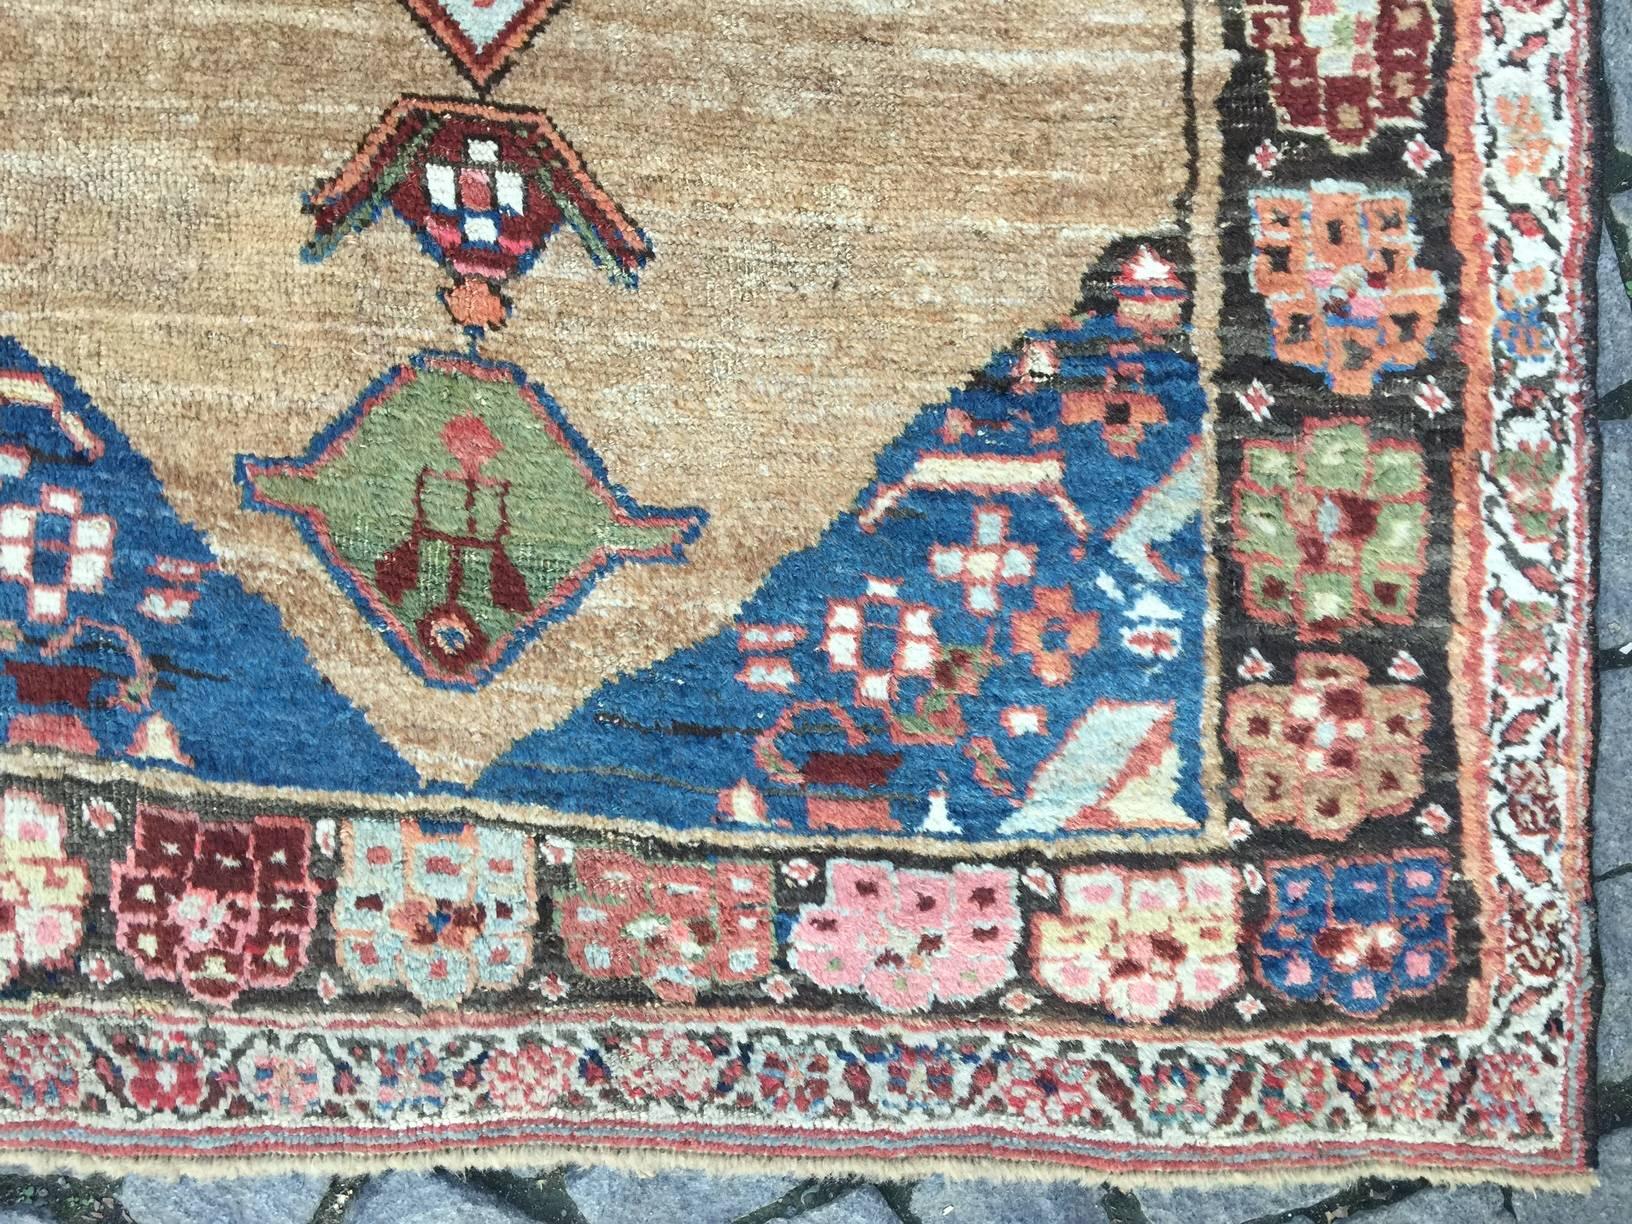 Hand-Knotted Antique Tribal Persian Bidjar Rug with Camel Wool. Ca late 19th Century